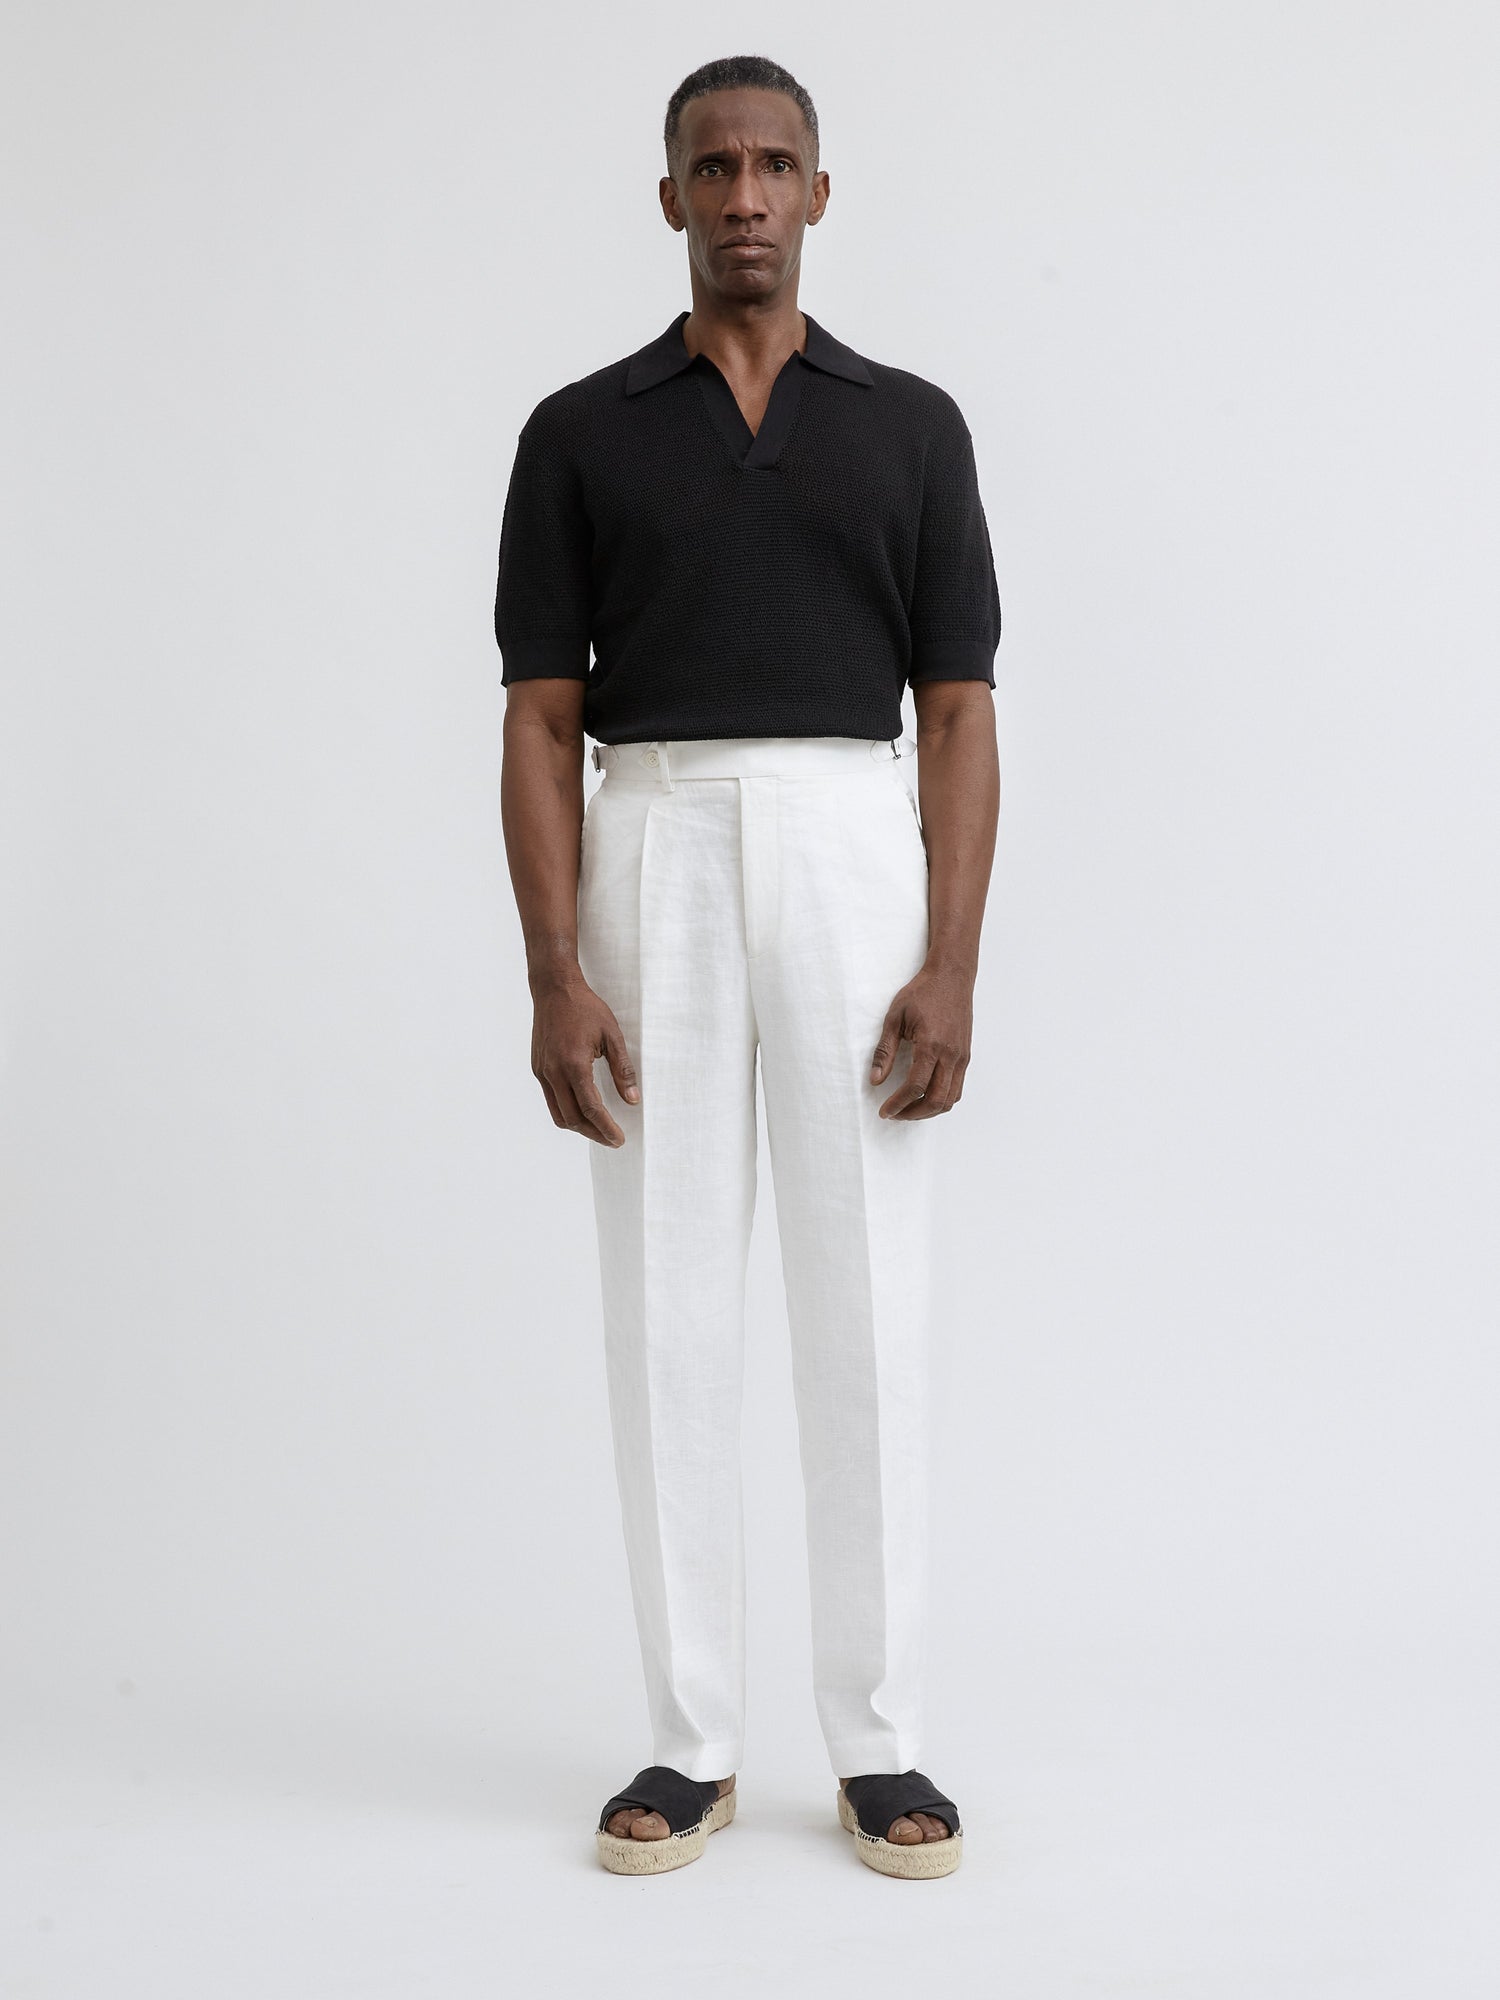 Black Knitted Short Sleeve Jersey - Grand Le Mar